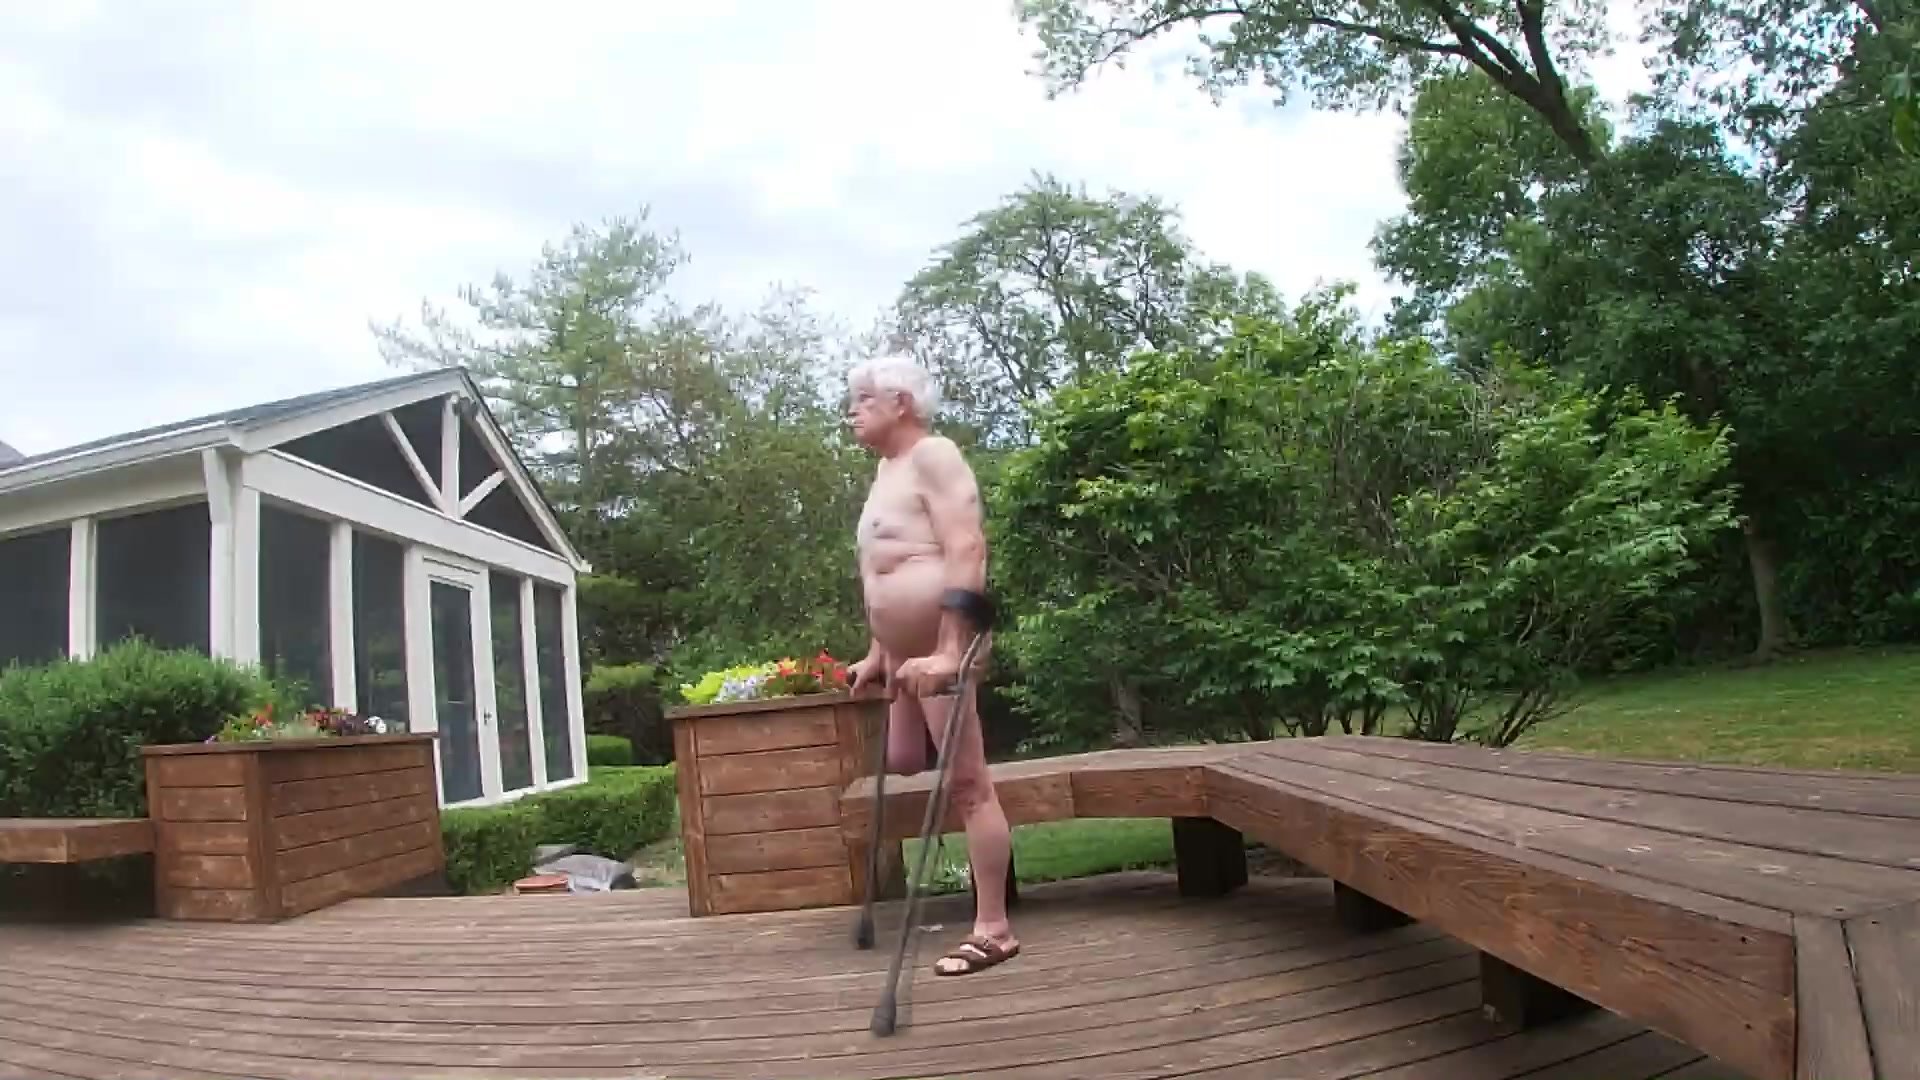 Deformed Polio Disabled Man Shows Naked Body Outdoors